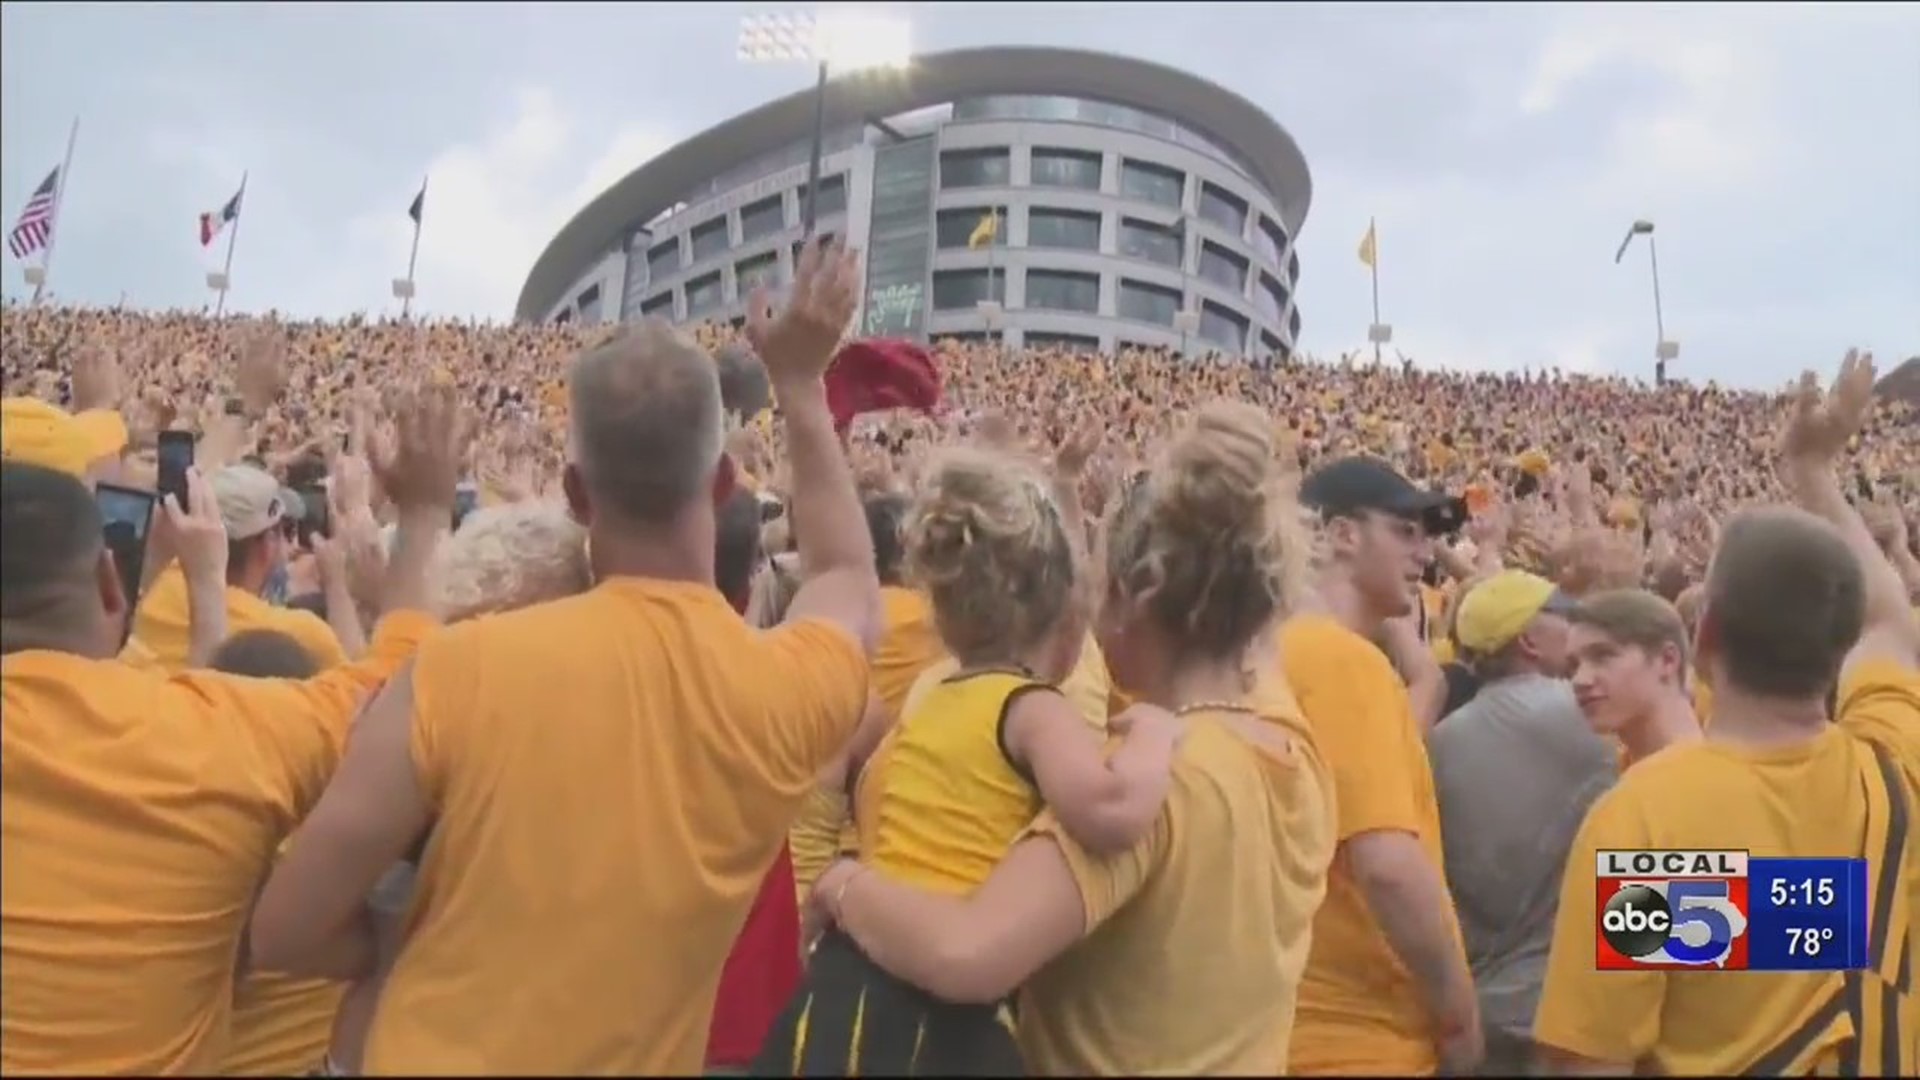 Iowa Football player writes special song about "The Wave"